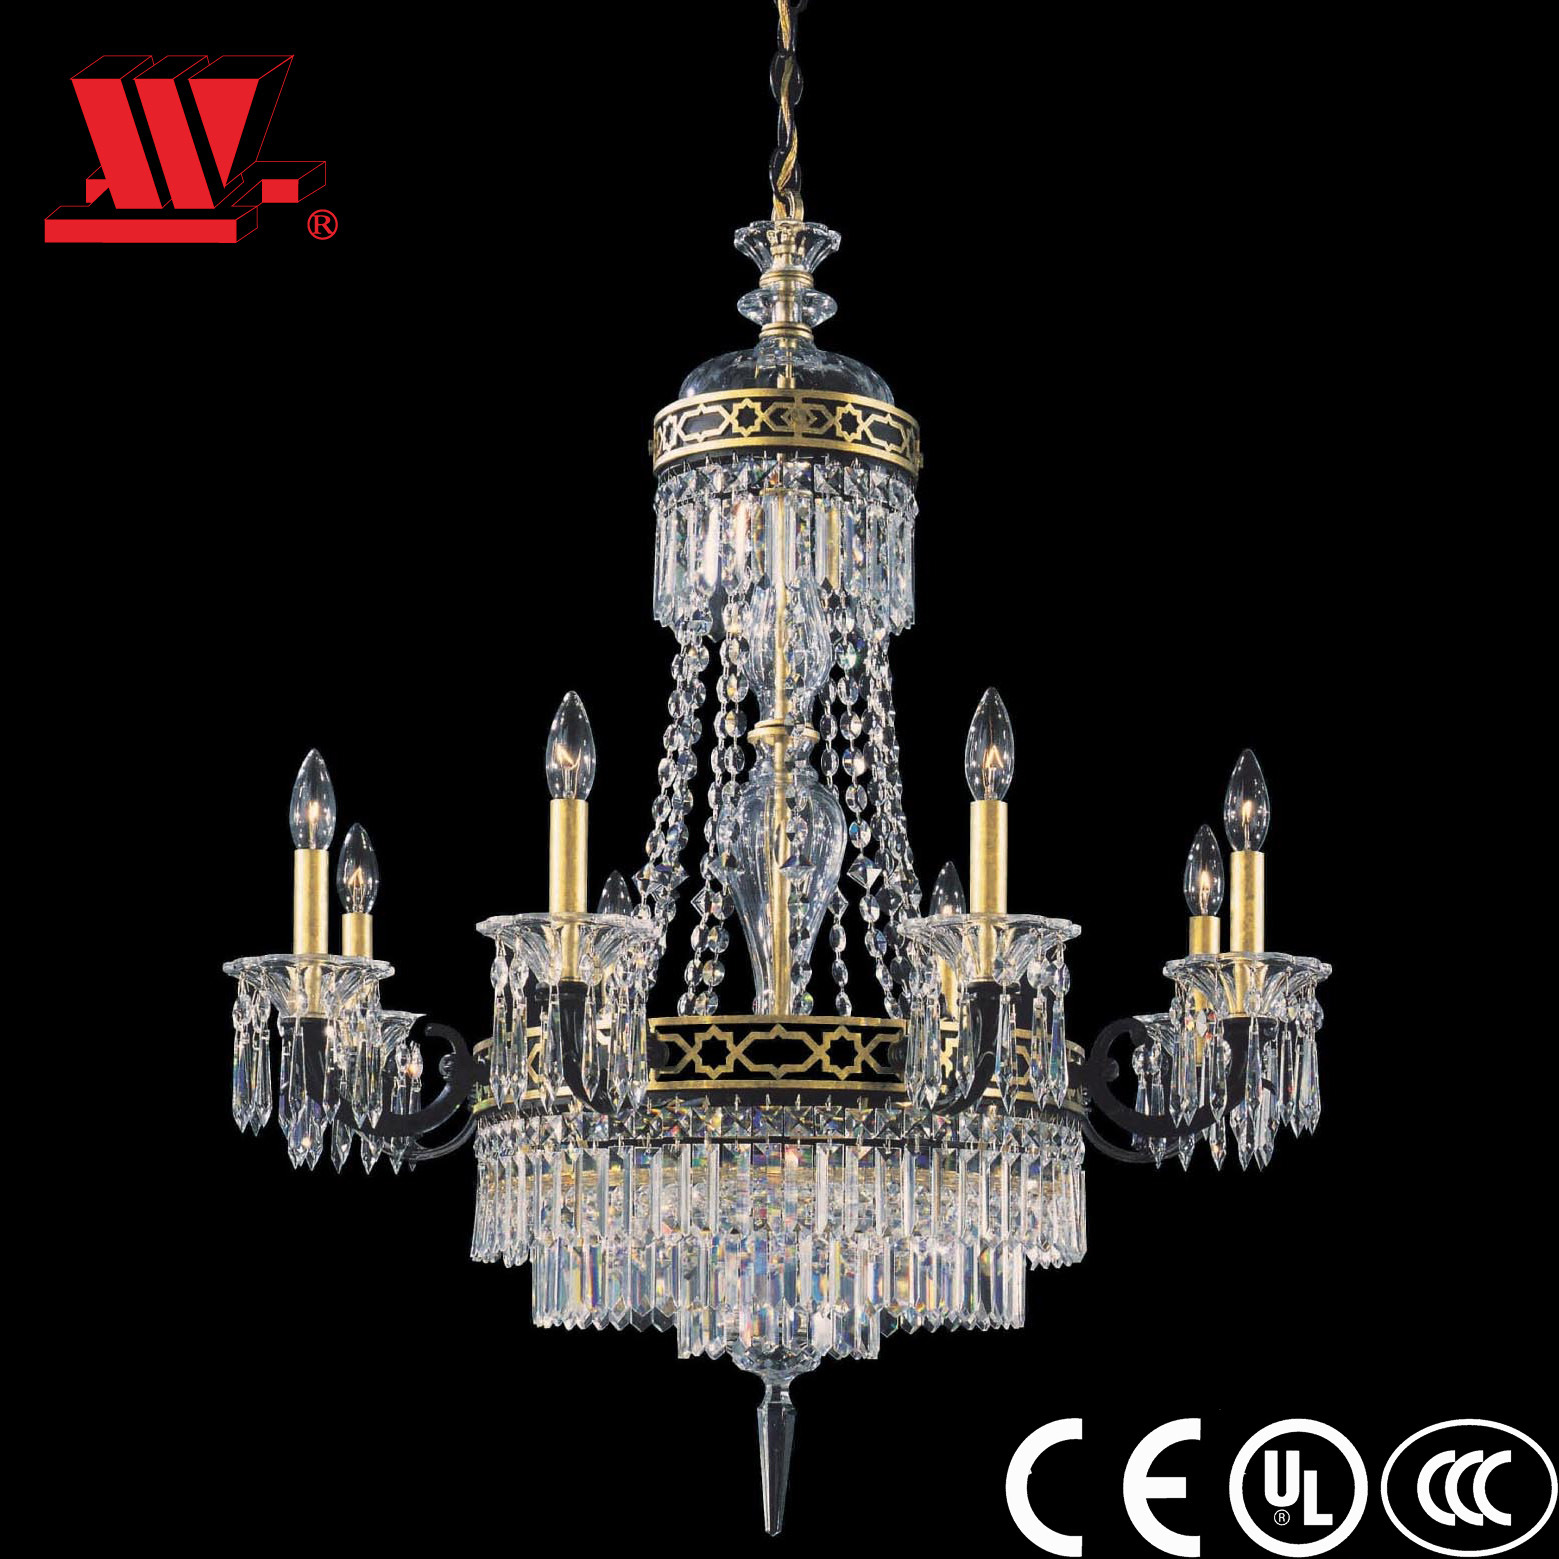 Traditional Crystal Chandelier 82128b